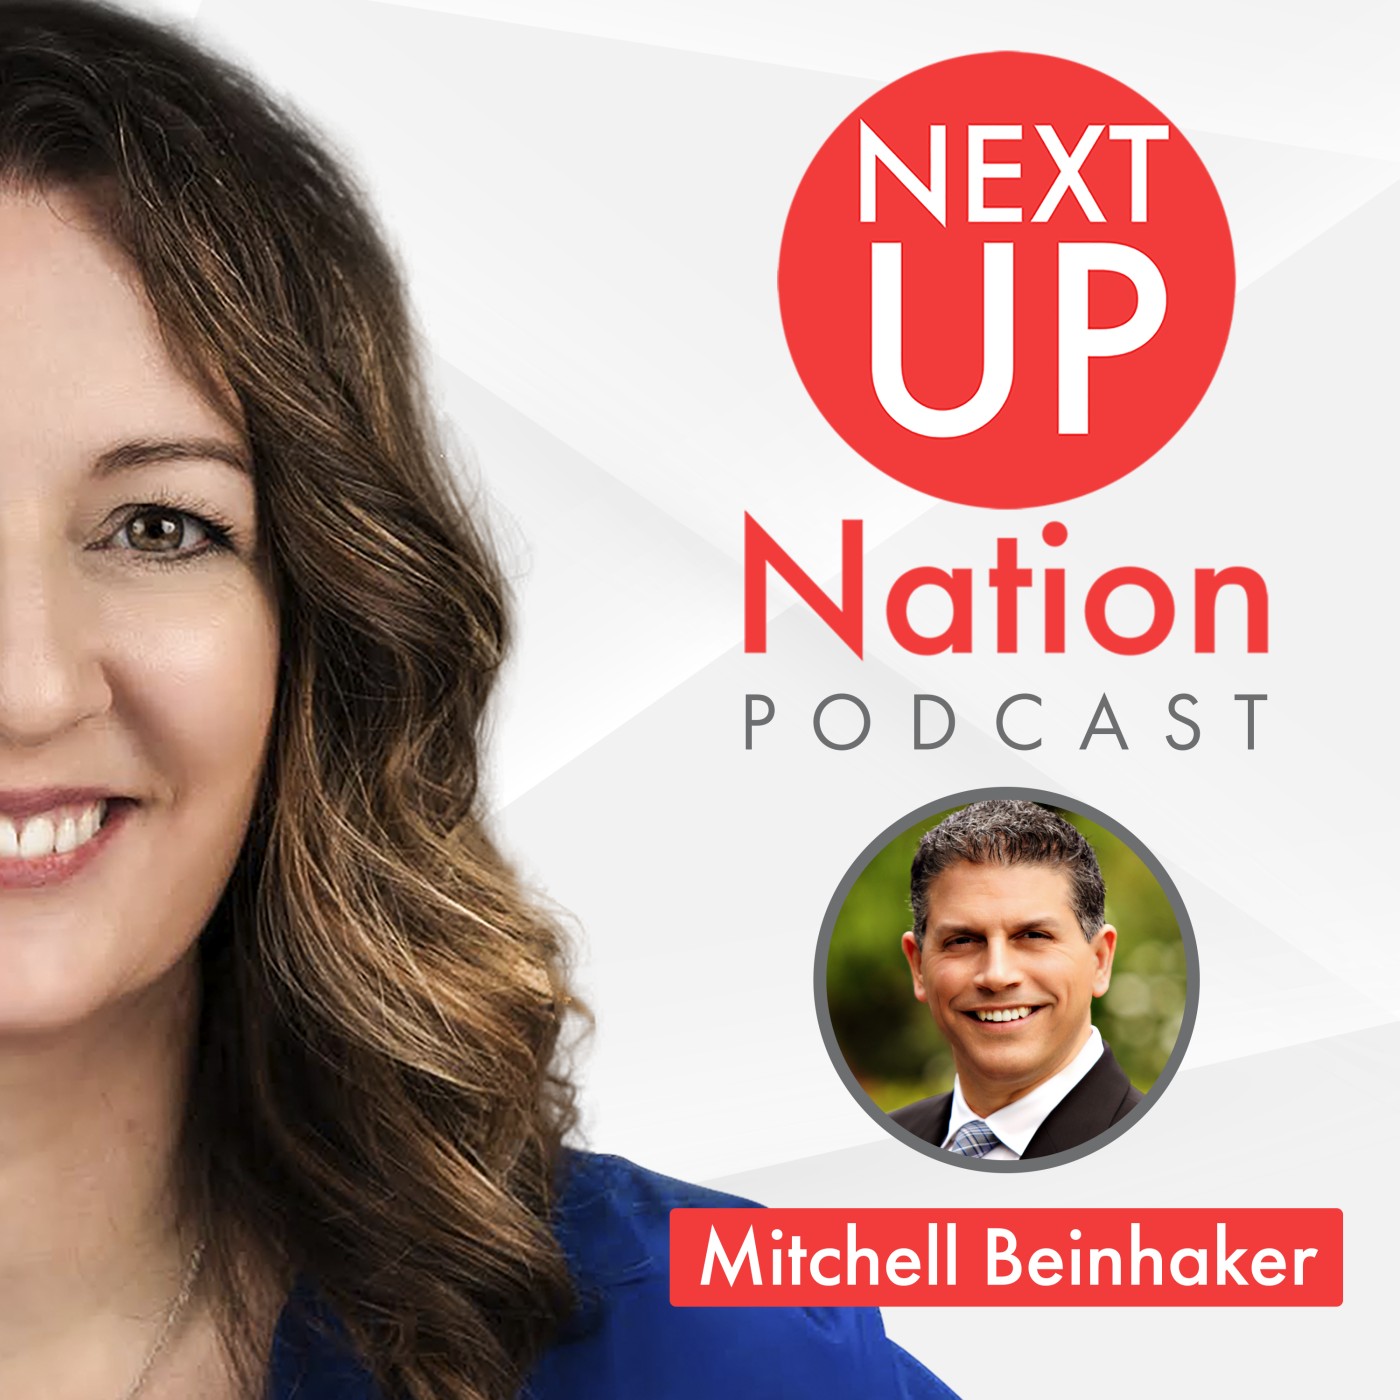 Mitchell Beinhaker Podcasts With an Entrepreneurial Mindset